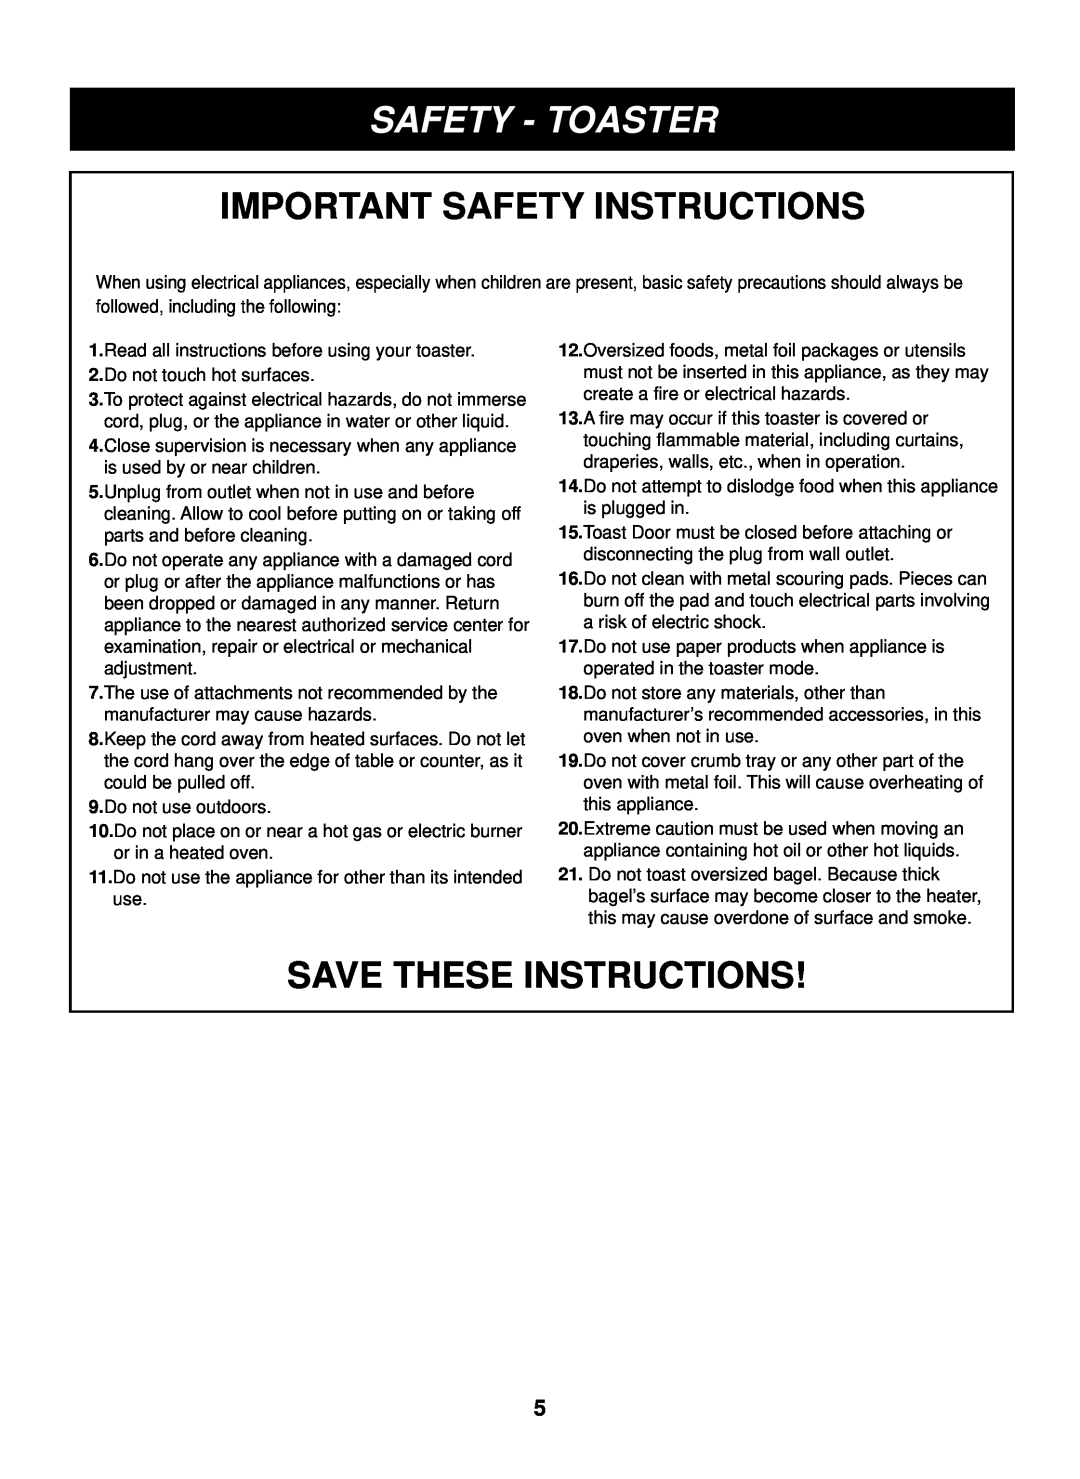 LG Electronics LTRM1240SW, LTRM1240SB Safety - Toaster, English, Important Safety Instructions, Save These Instructions 